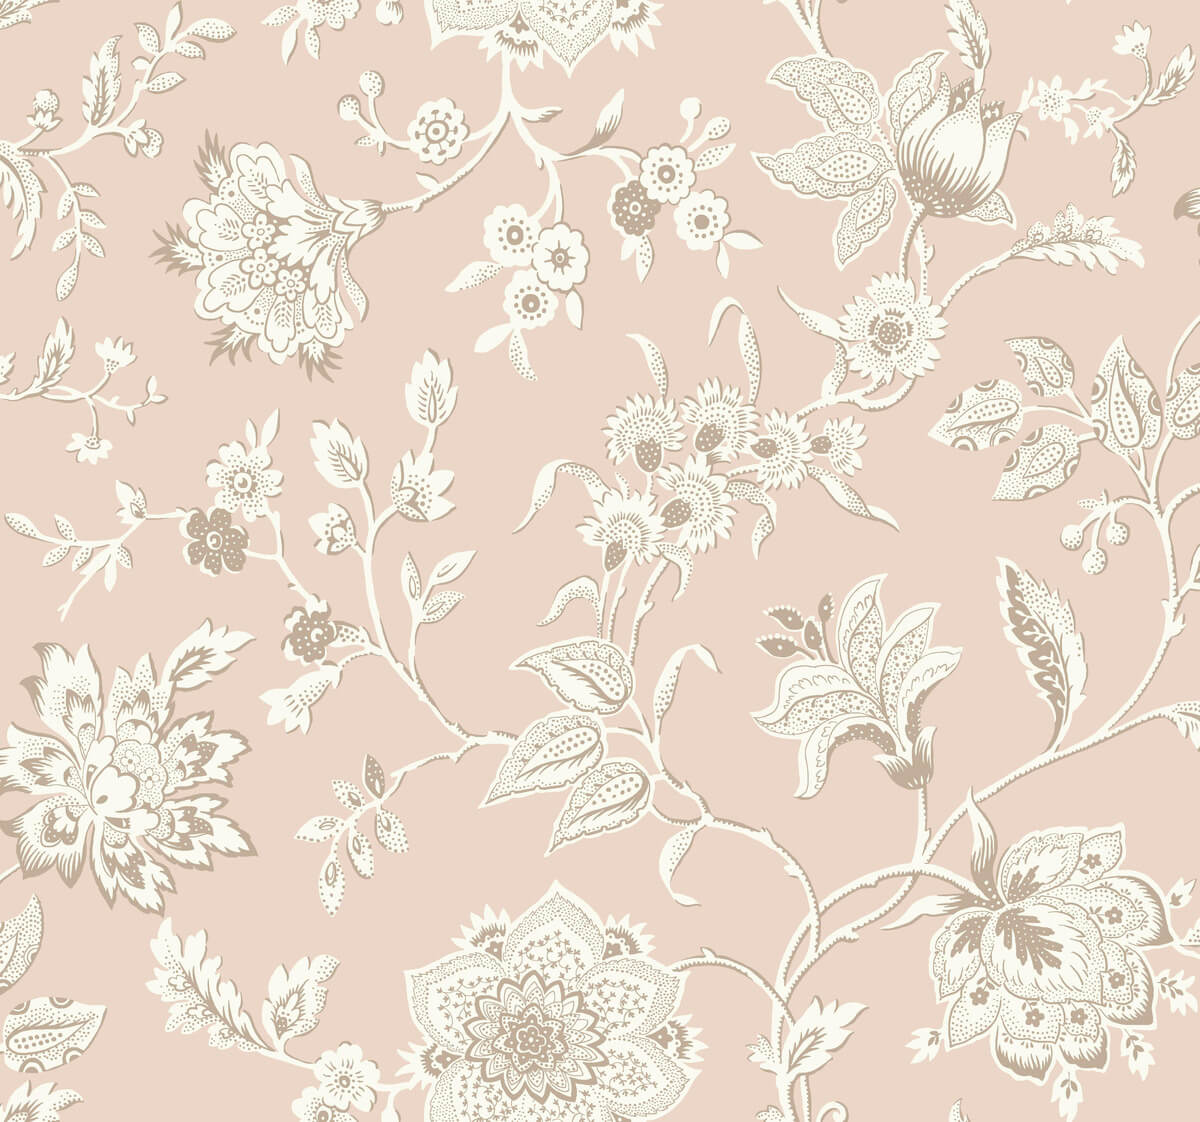 Toile Resource Library Sutton Wallpaper - Pink